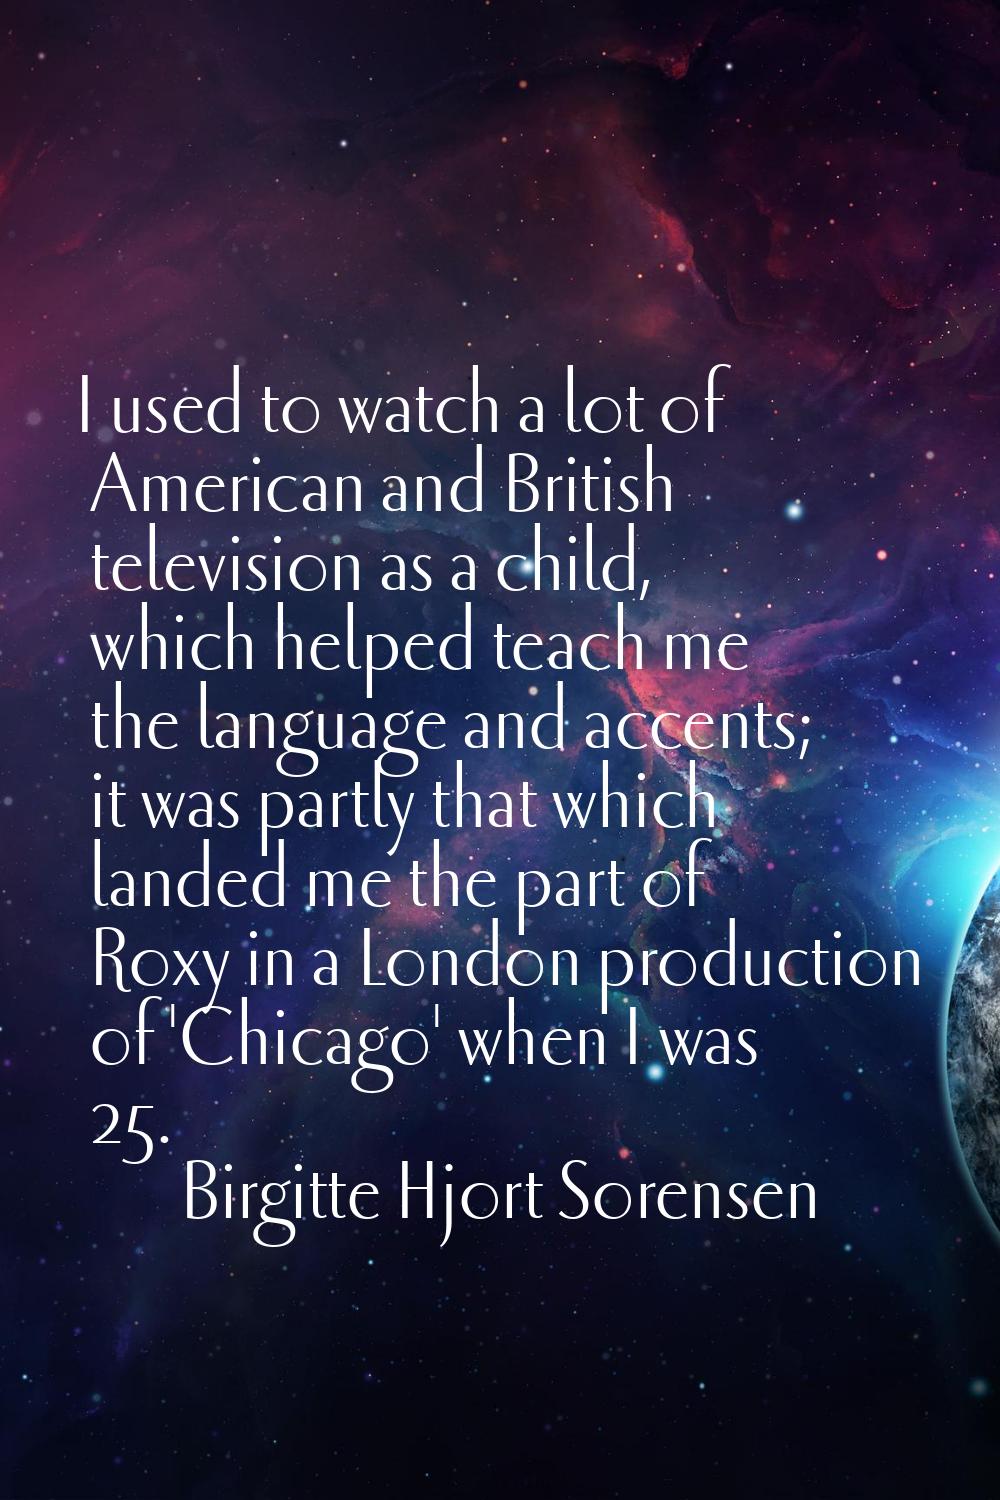 I used to watch a lot of American and British television as a child, which helped teach me the lang